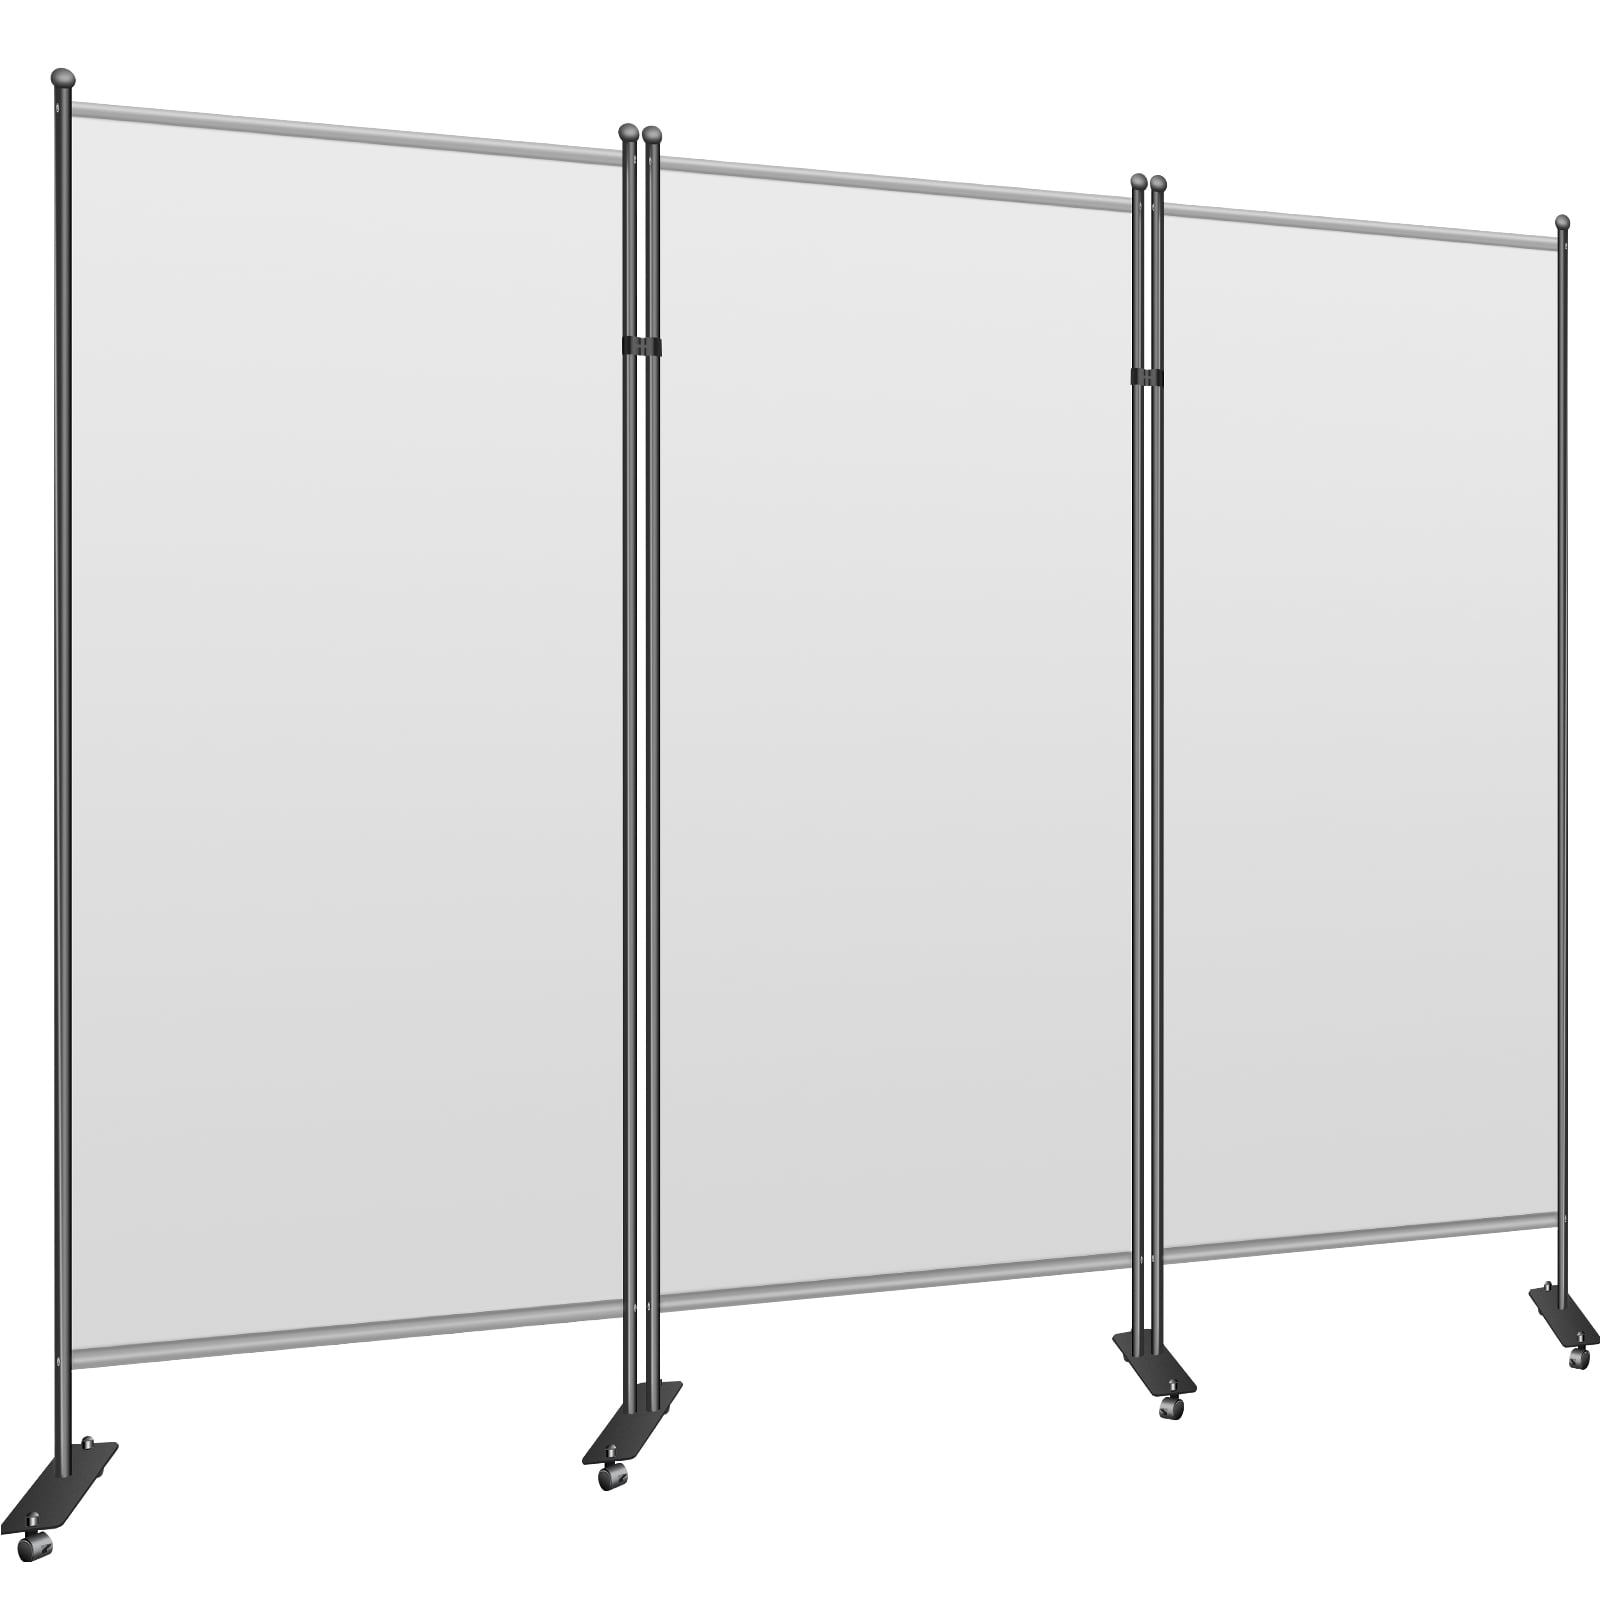 Details about   6 ft Tall White Cardboard Room Divider 